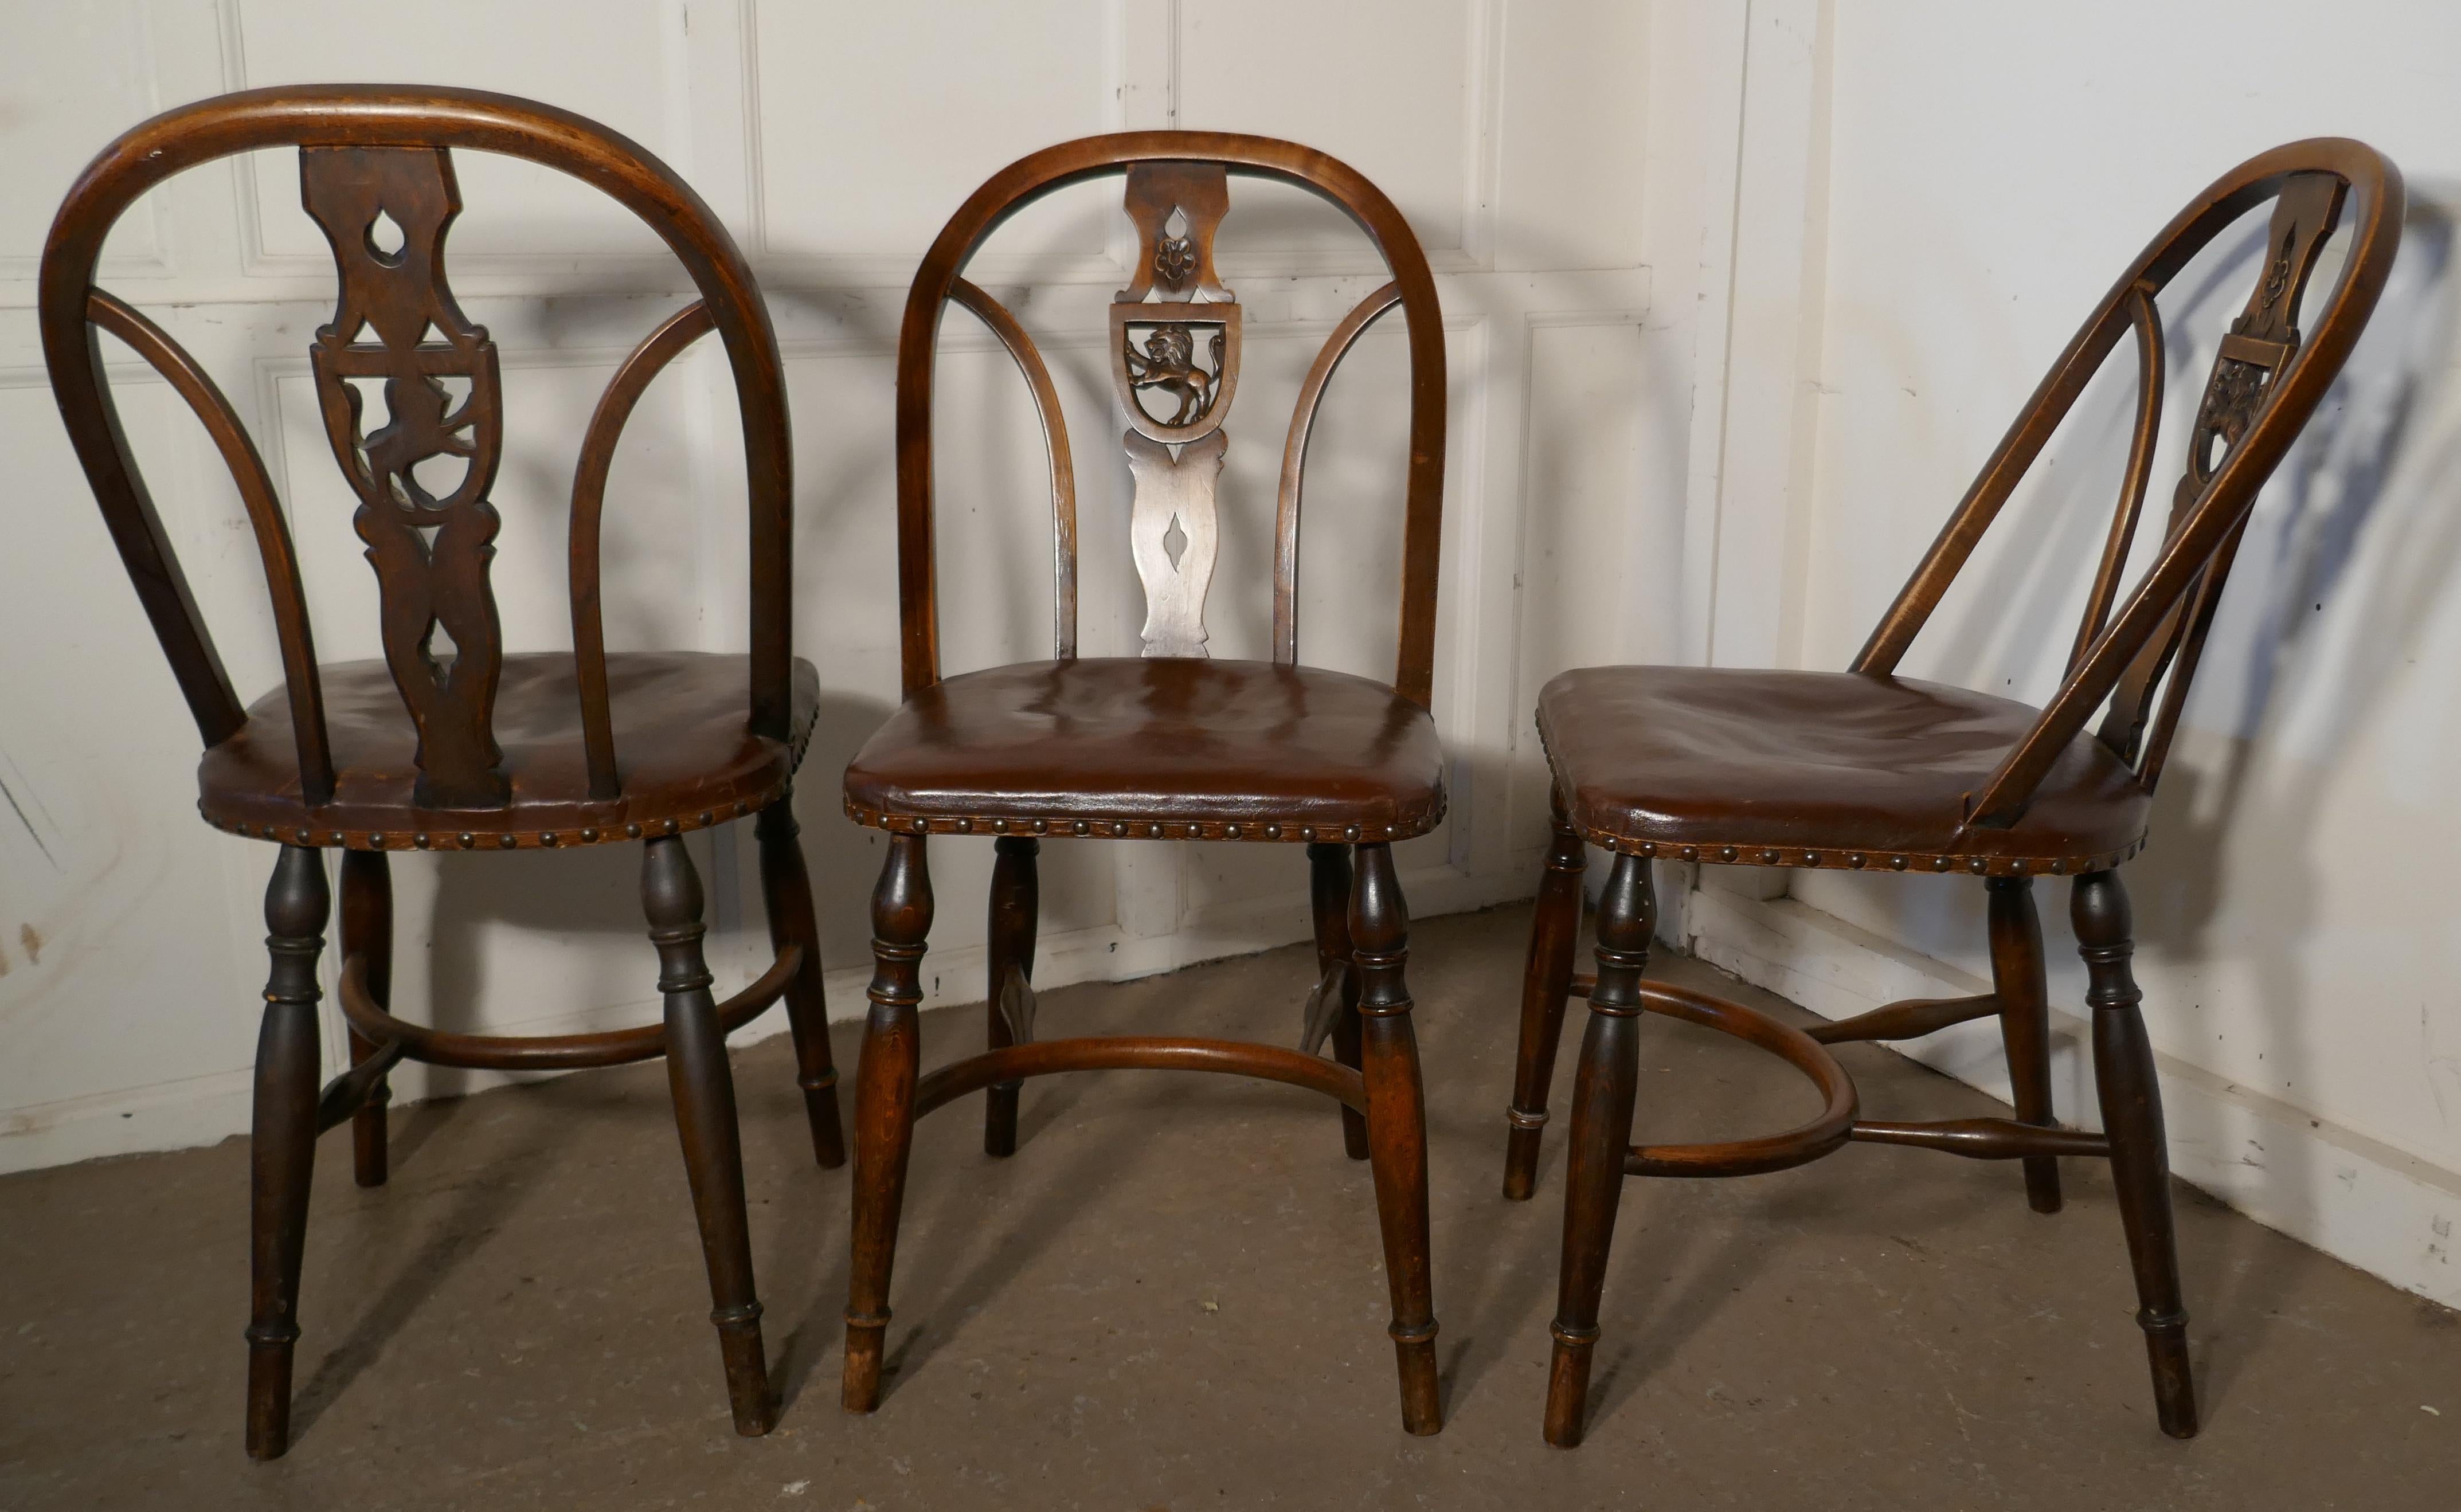 19th Century Set of 6 Arts & Crafts Gothic Heraldic Lion Back Windsor Chairs